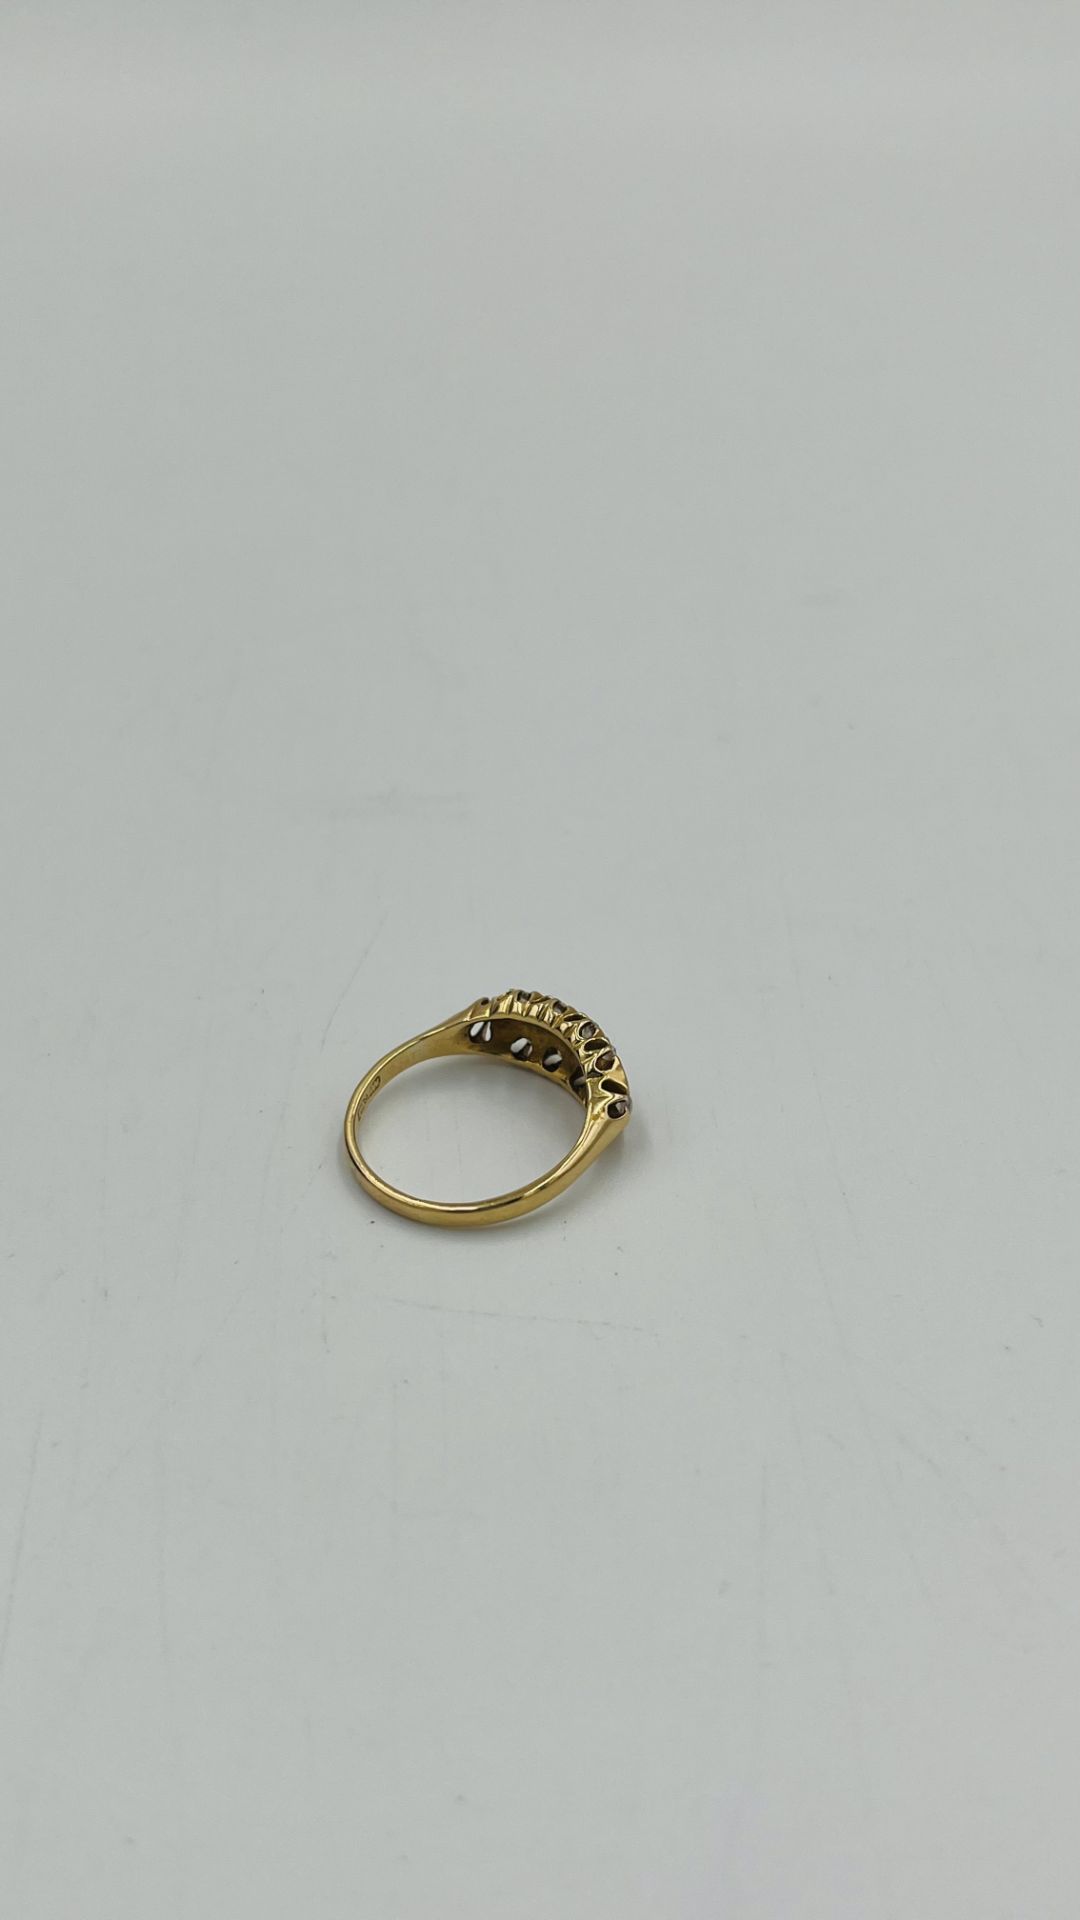 19ct gold ring set with diamonds and pearls - Image 4 of 5